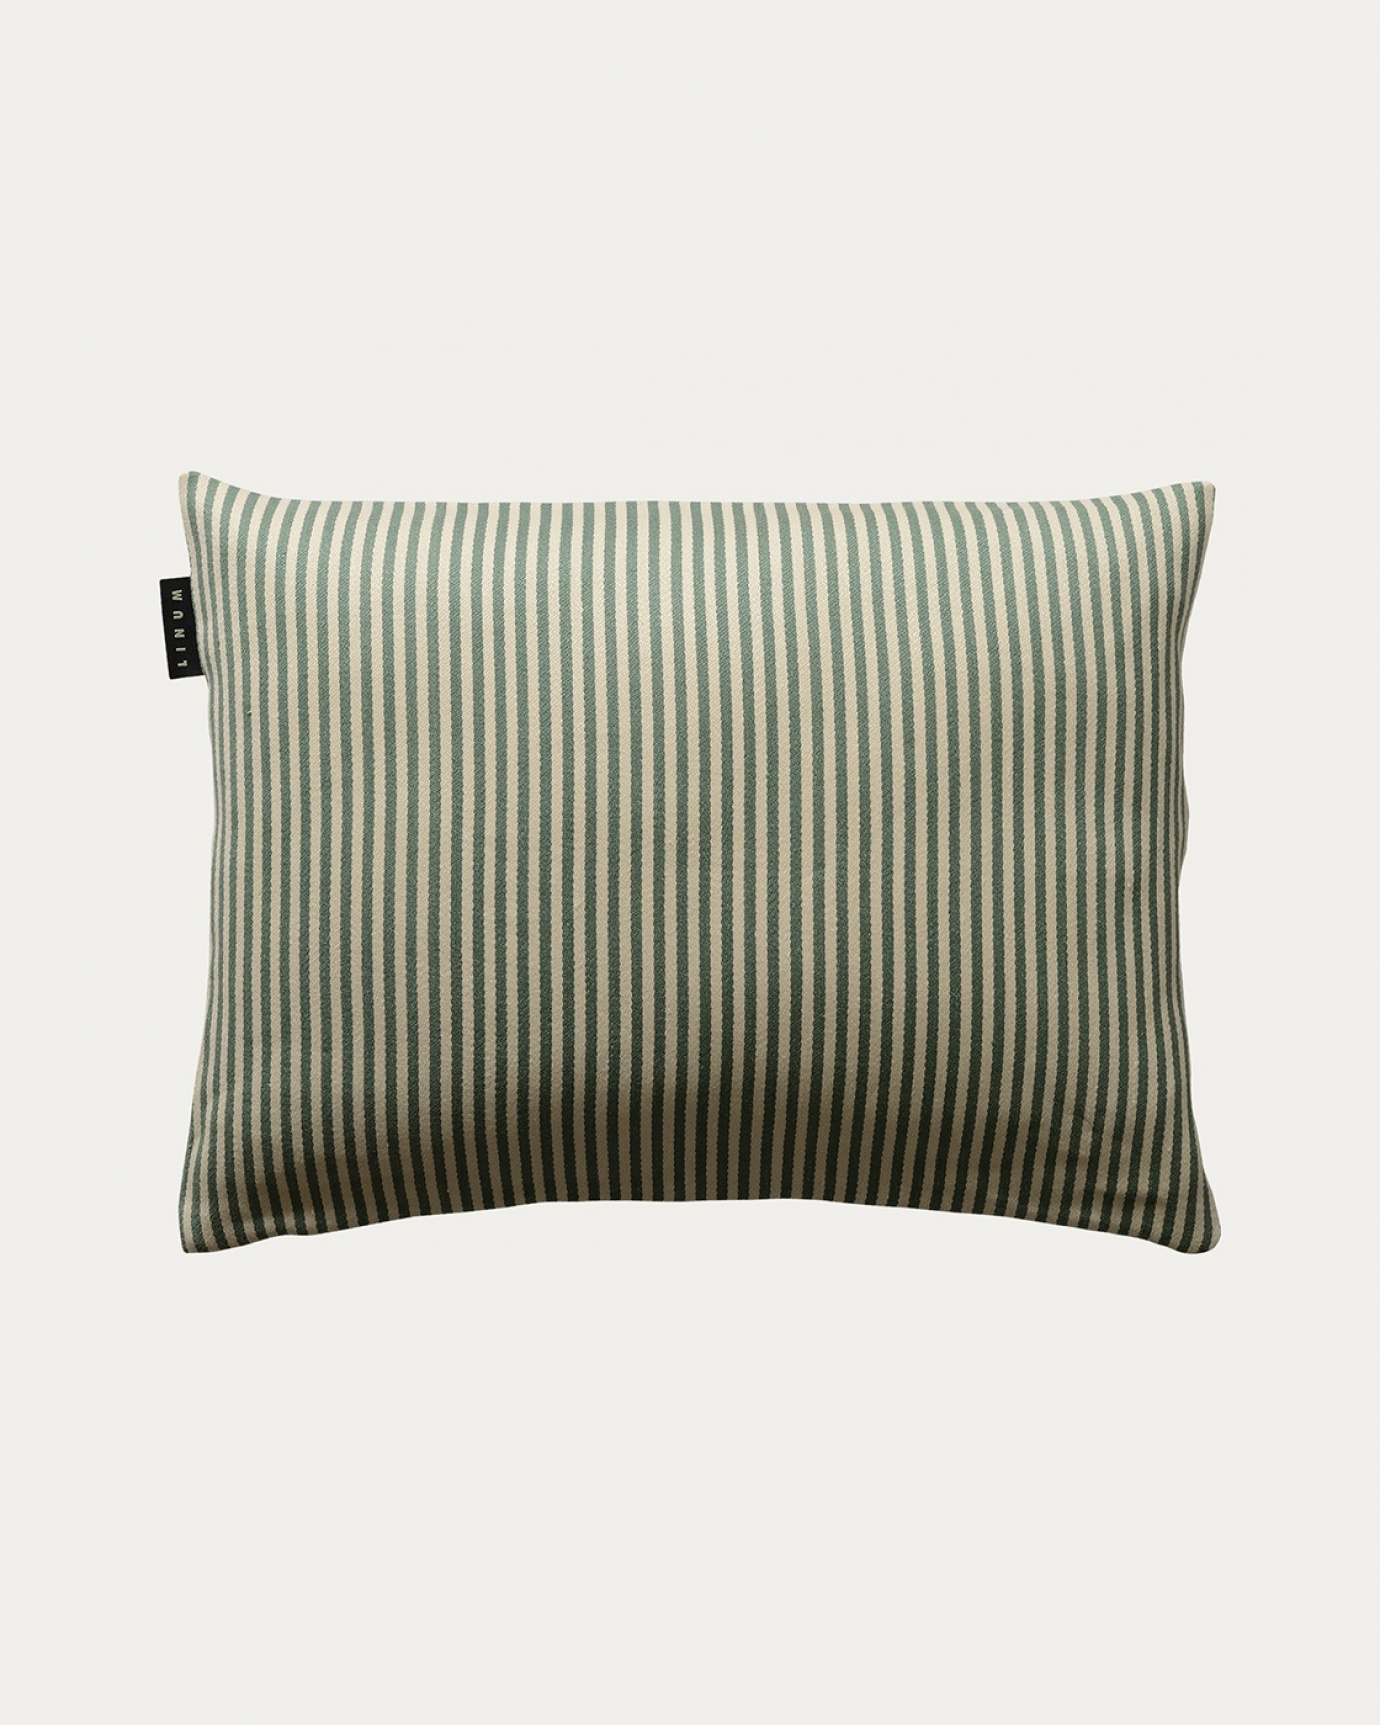 Product image grey green CALCIO cushion cover with thin stripes of 77% linen and 23% cotton from LINUM DESIGN. Size 35x50 cm.